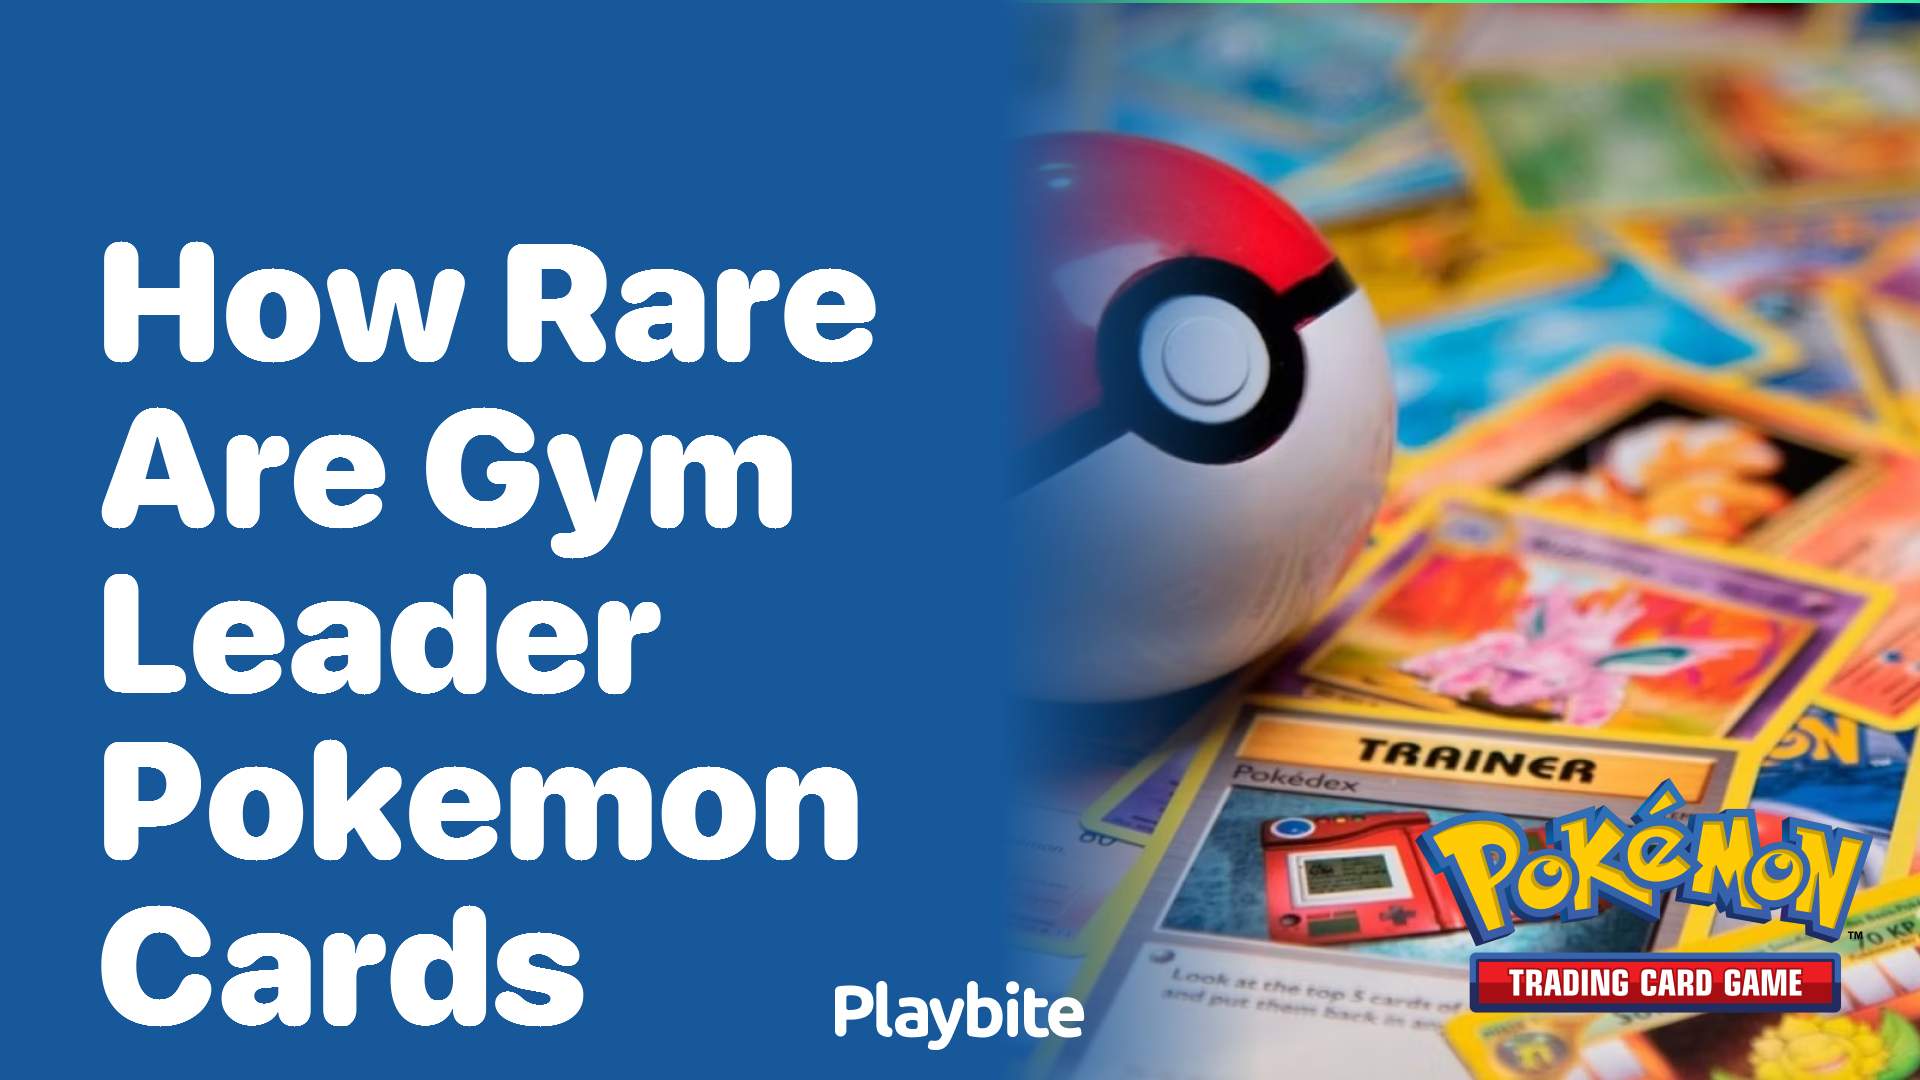 How Rare are Gym Leader Pokemon Cards?